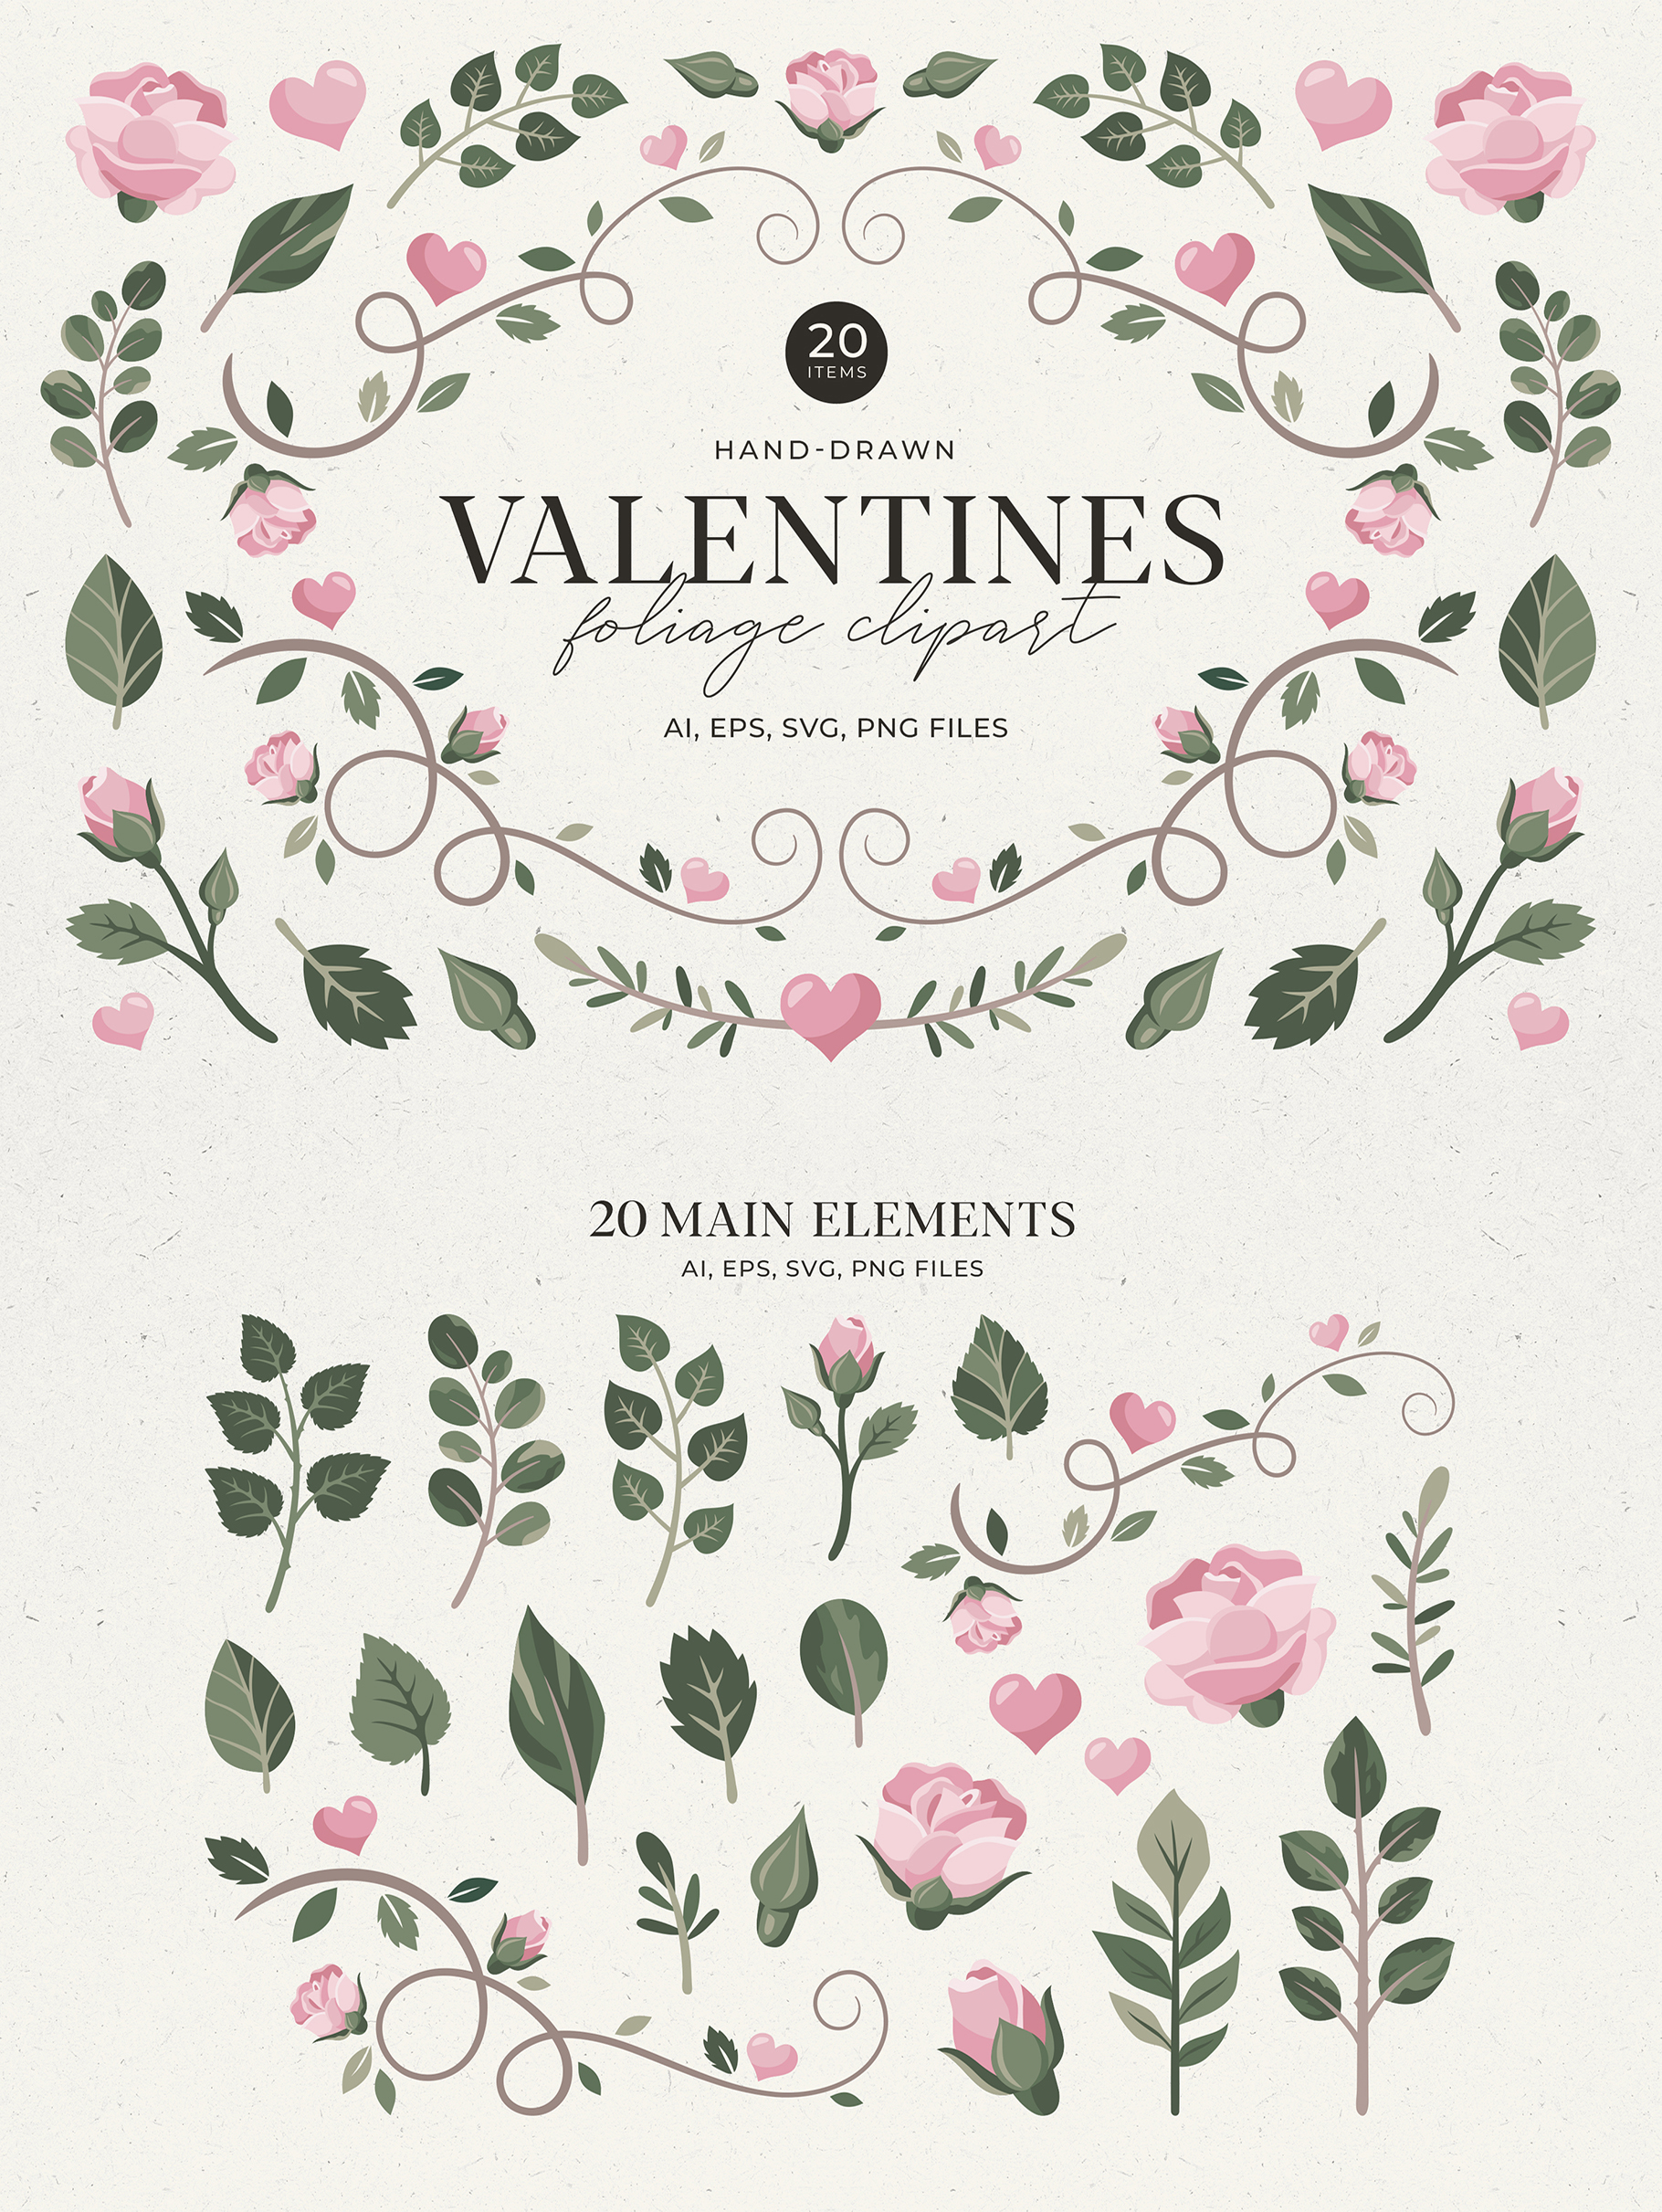 Valentines Foliage Graphic Pack AI EPS PNG